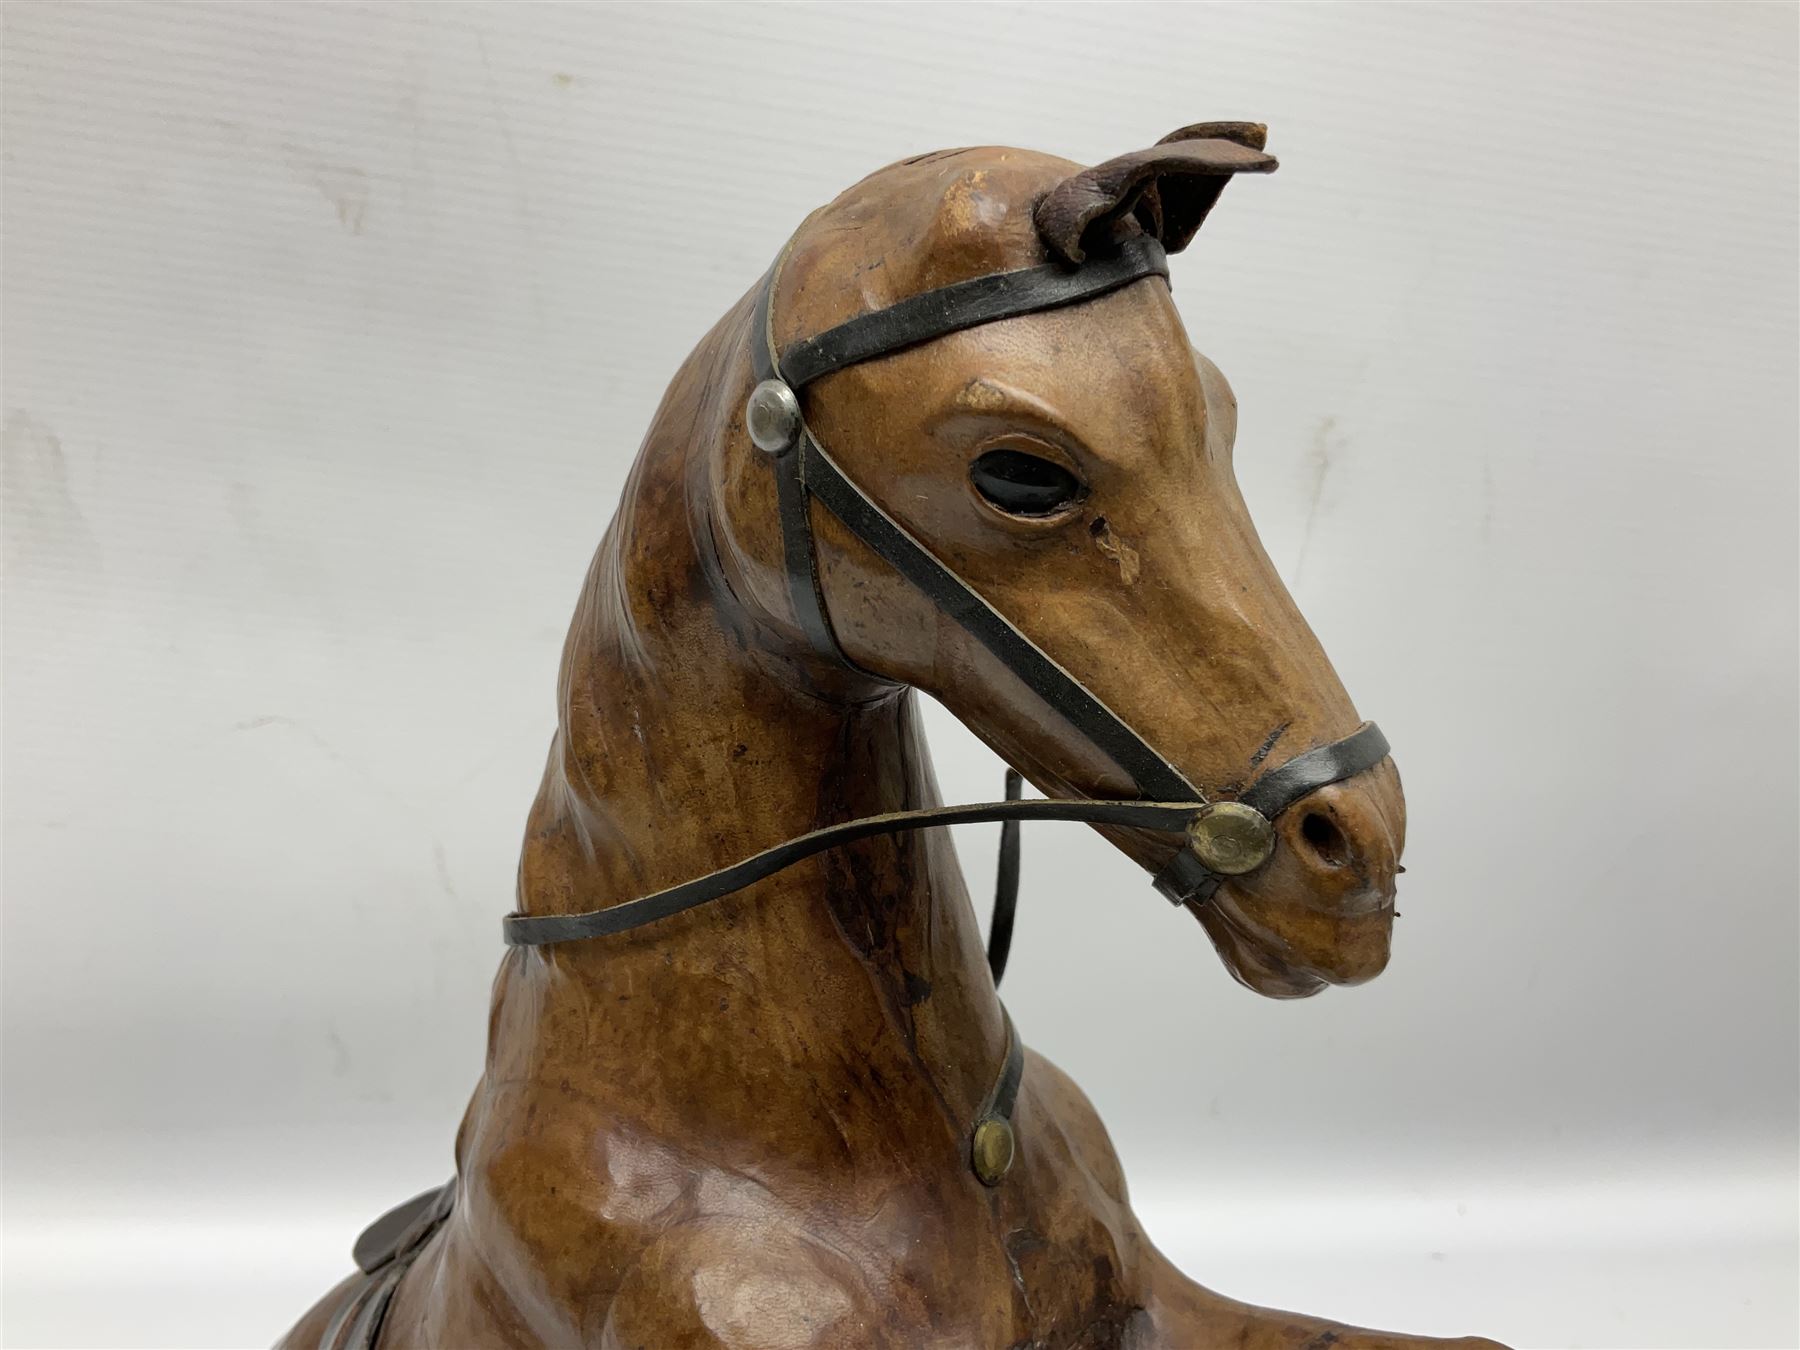 Leather covered horse figure - Image 4 of 8